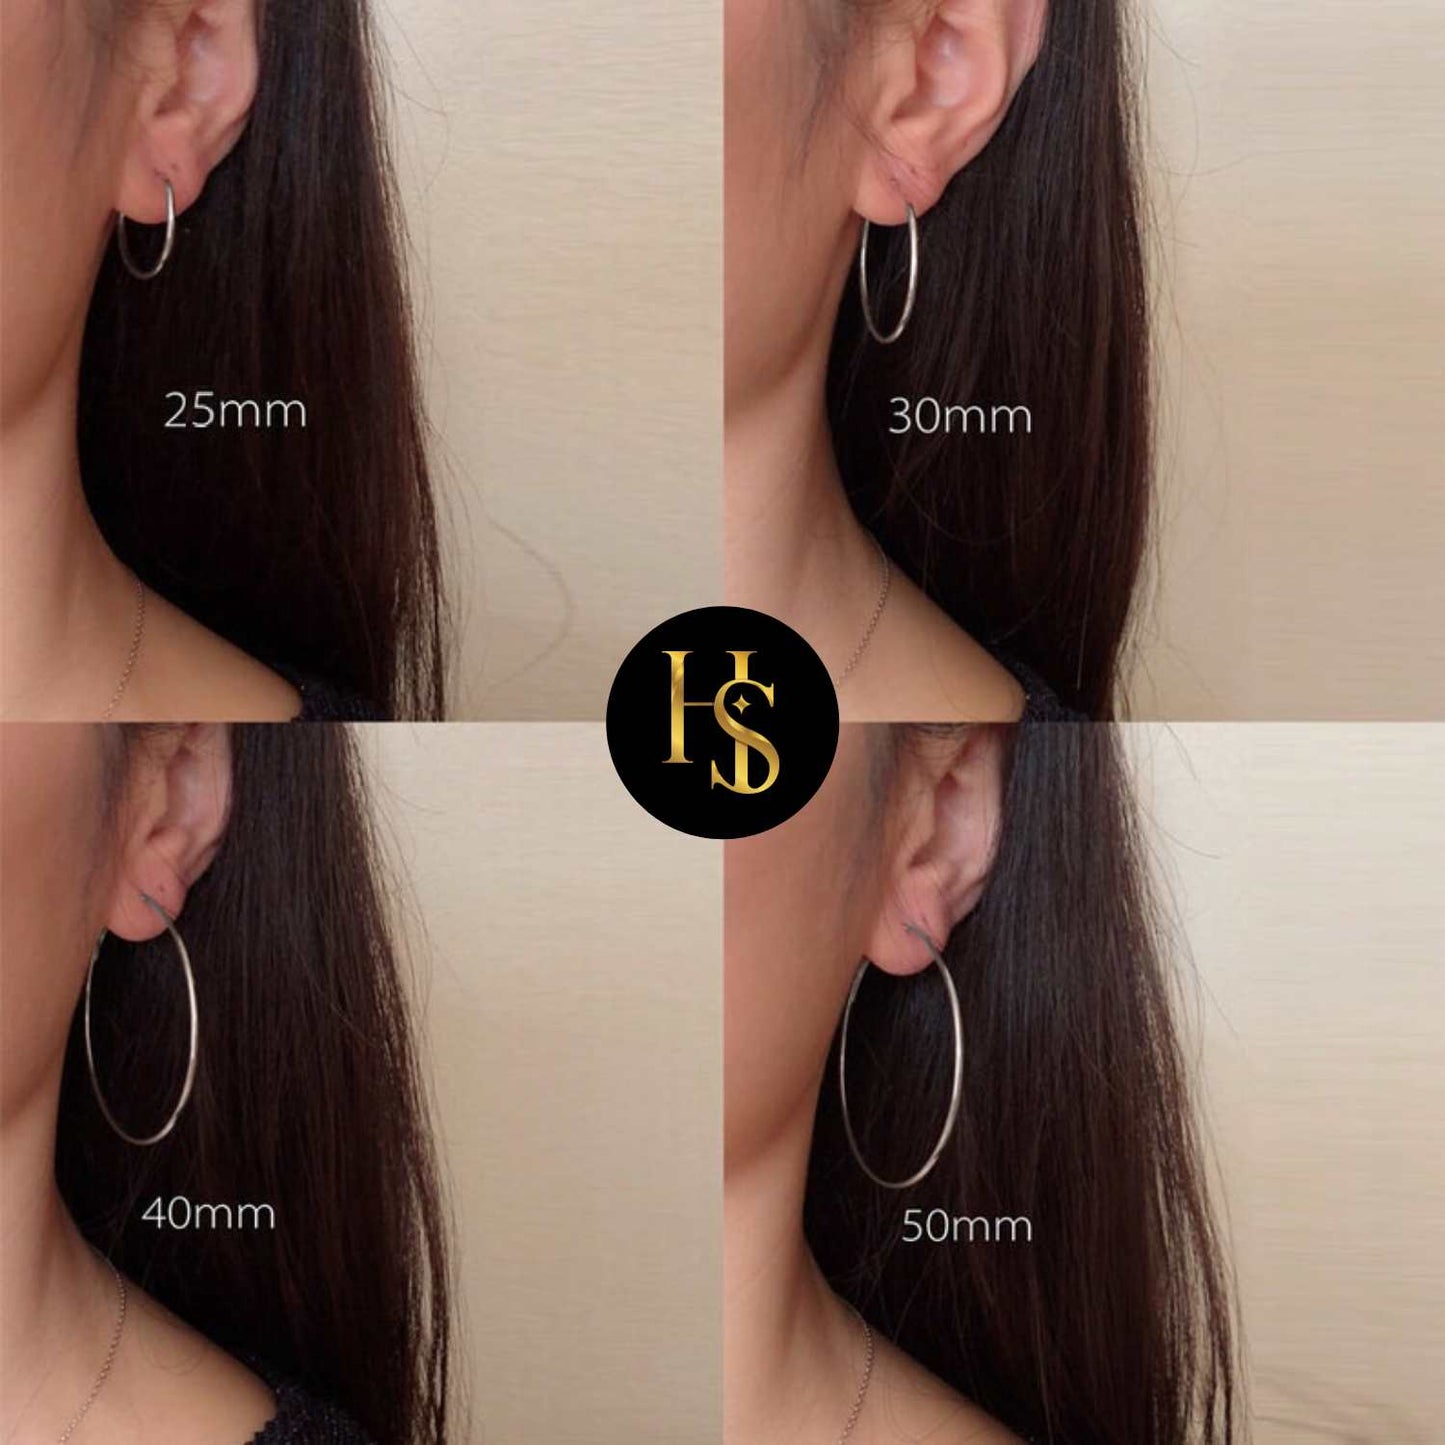 Classic Hoop Earrings in 92.5 Sterling Silver - 1.2mm Thickness - Big Sizes 25mm to 50mm